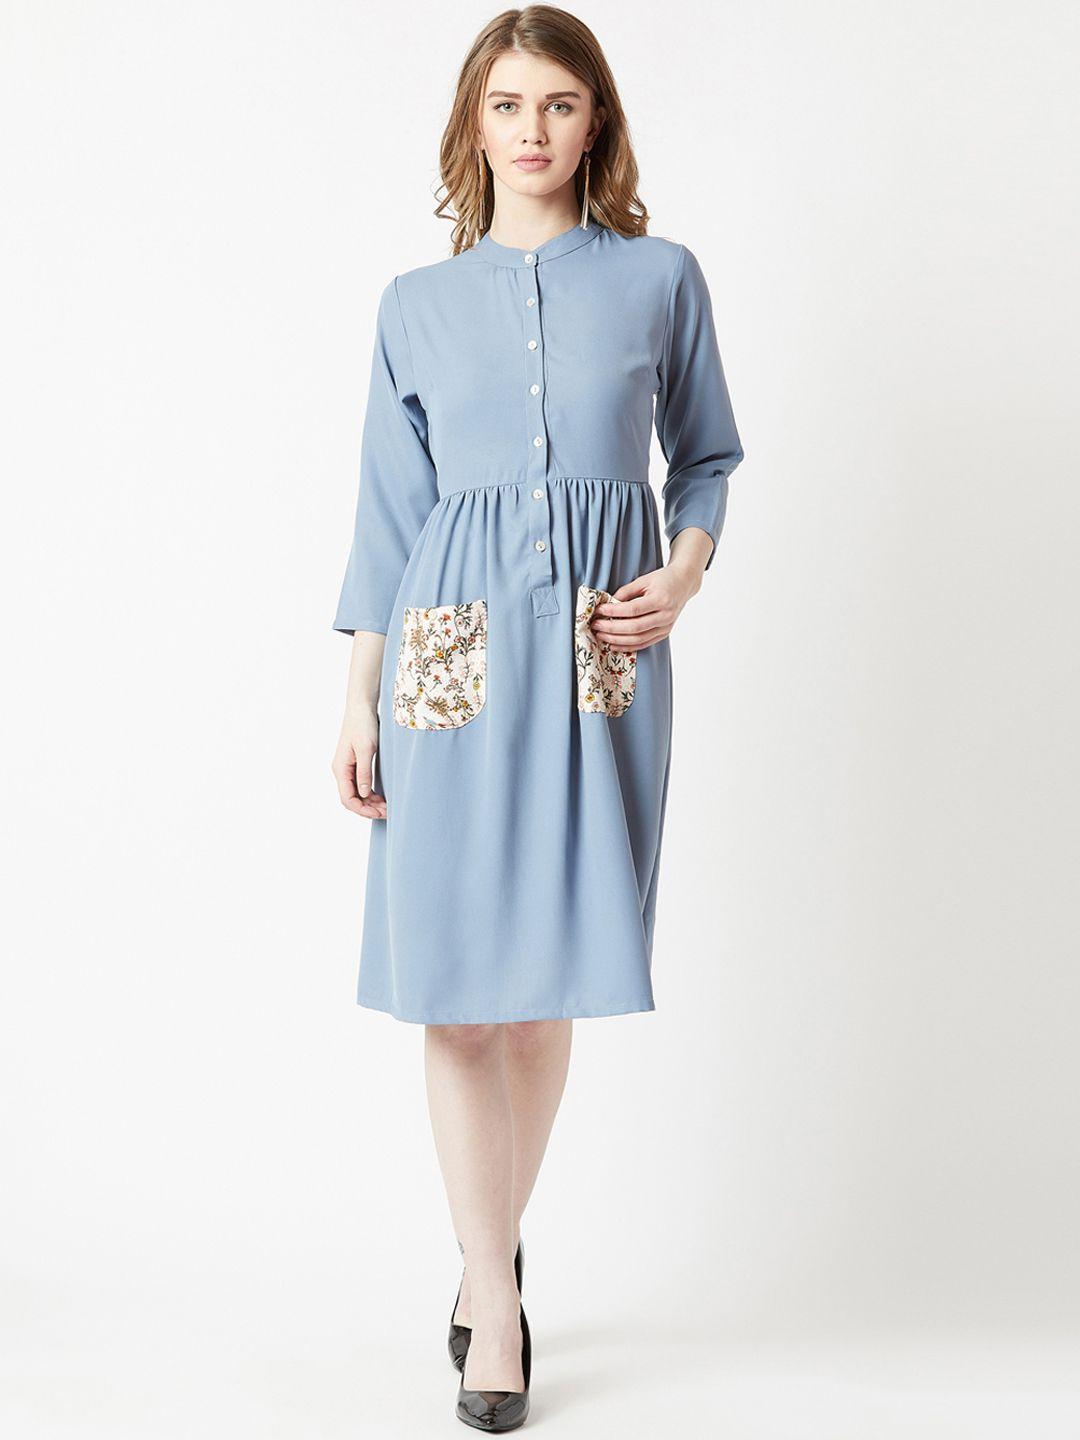 miss-chase-women-blue-printed-fit-and-flare-dress